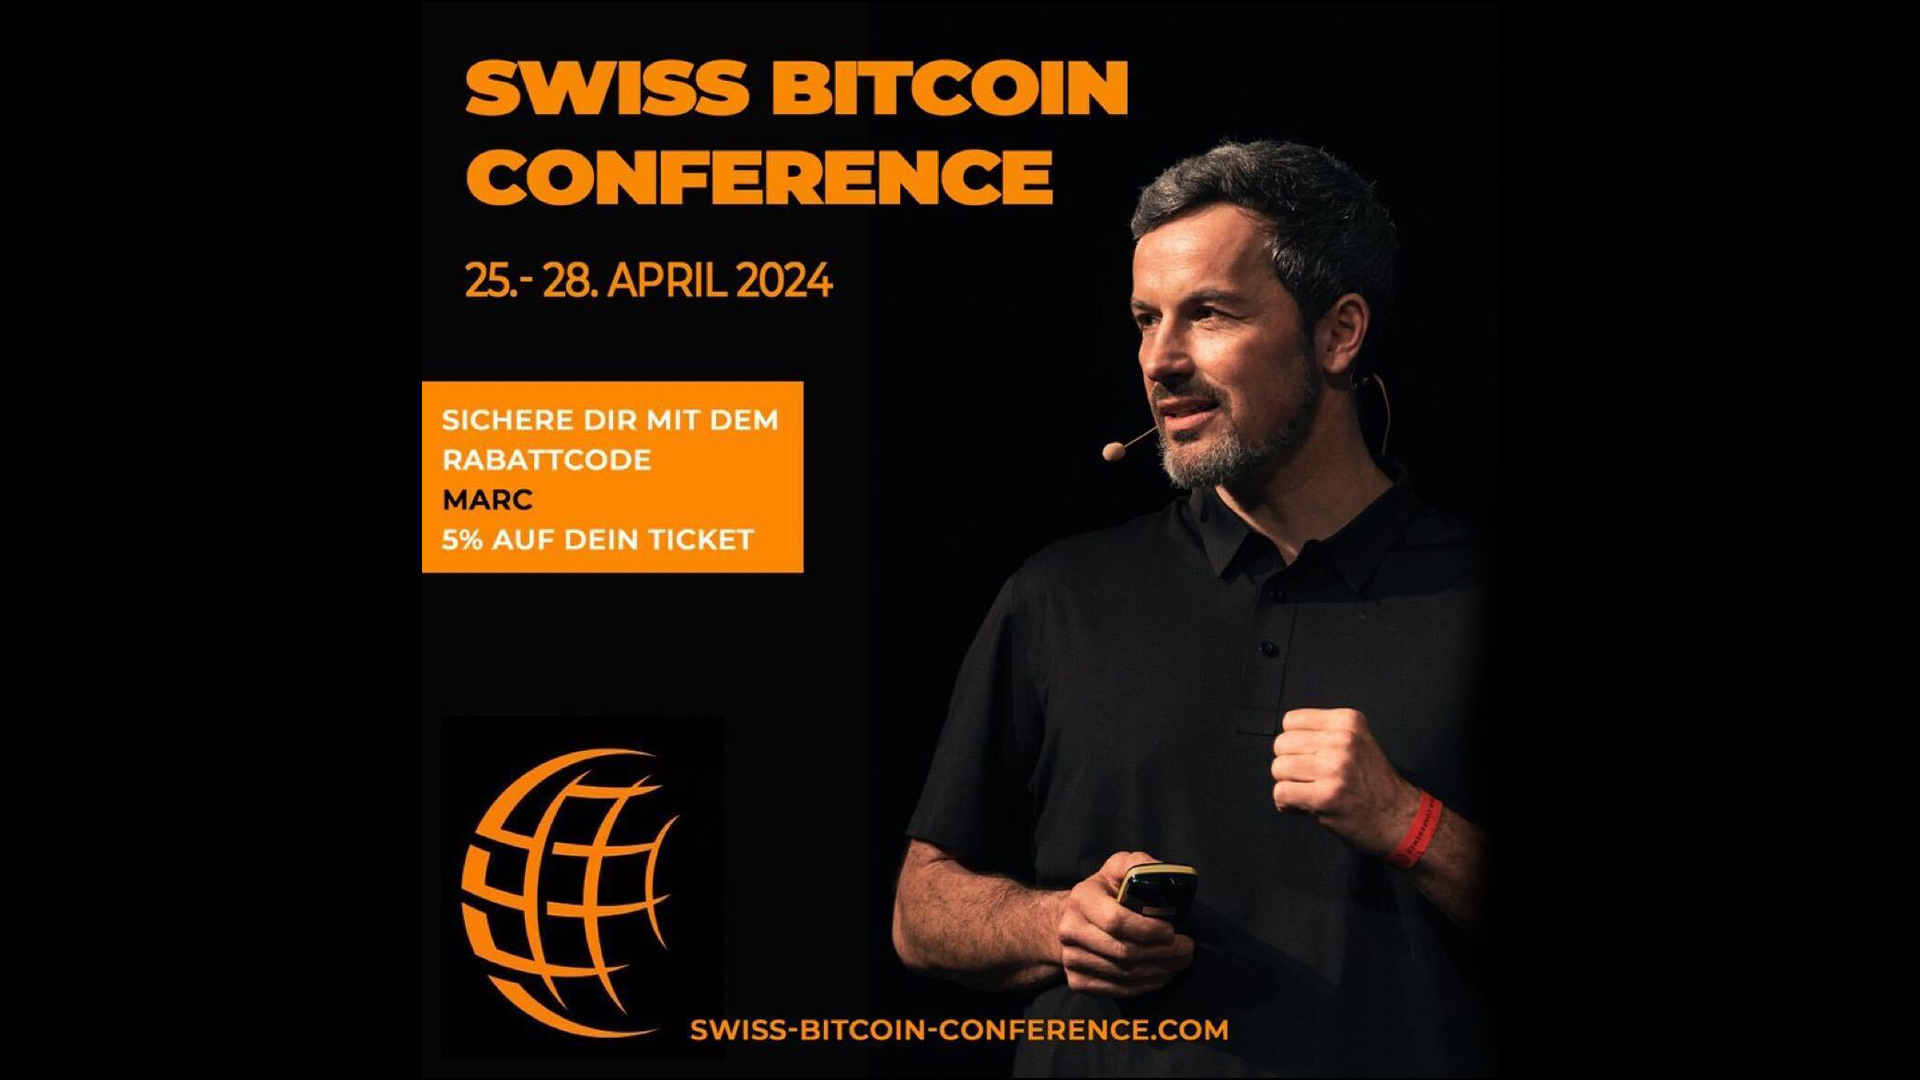 Swiss Bitcoin Conference